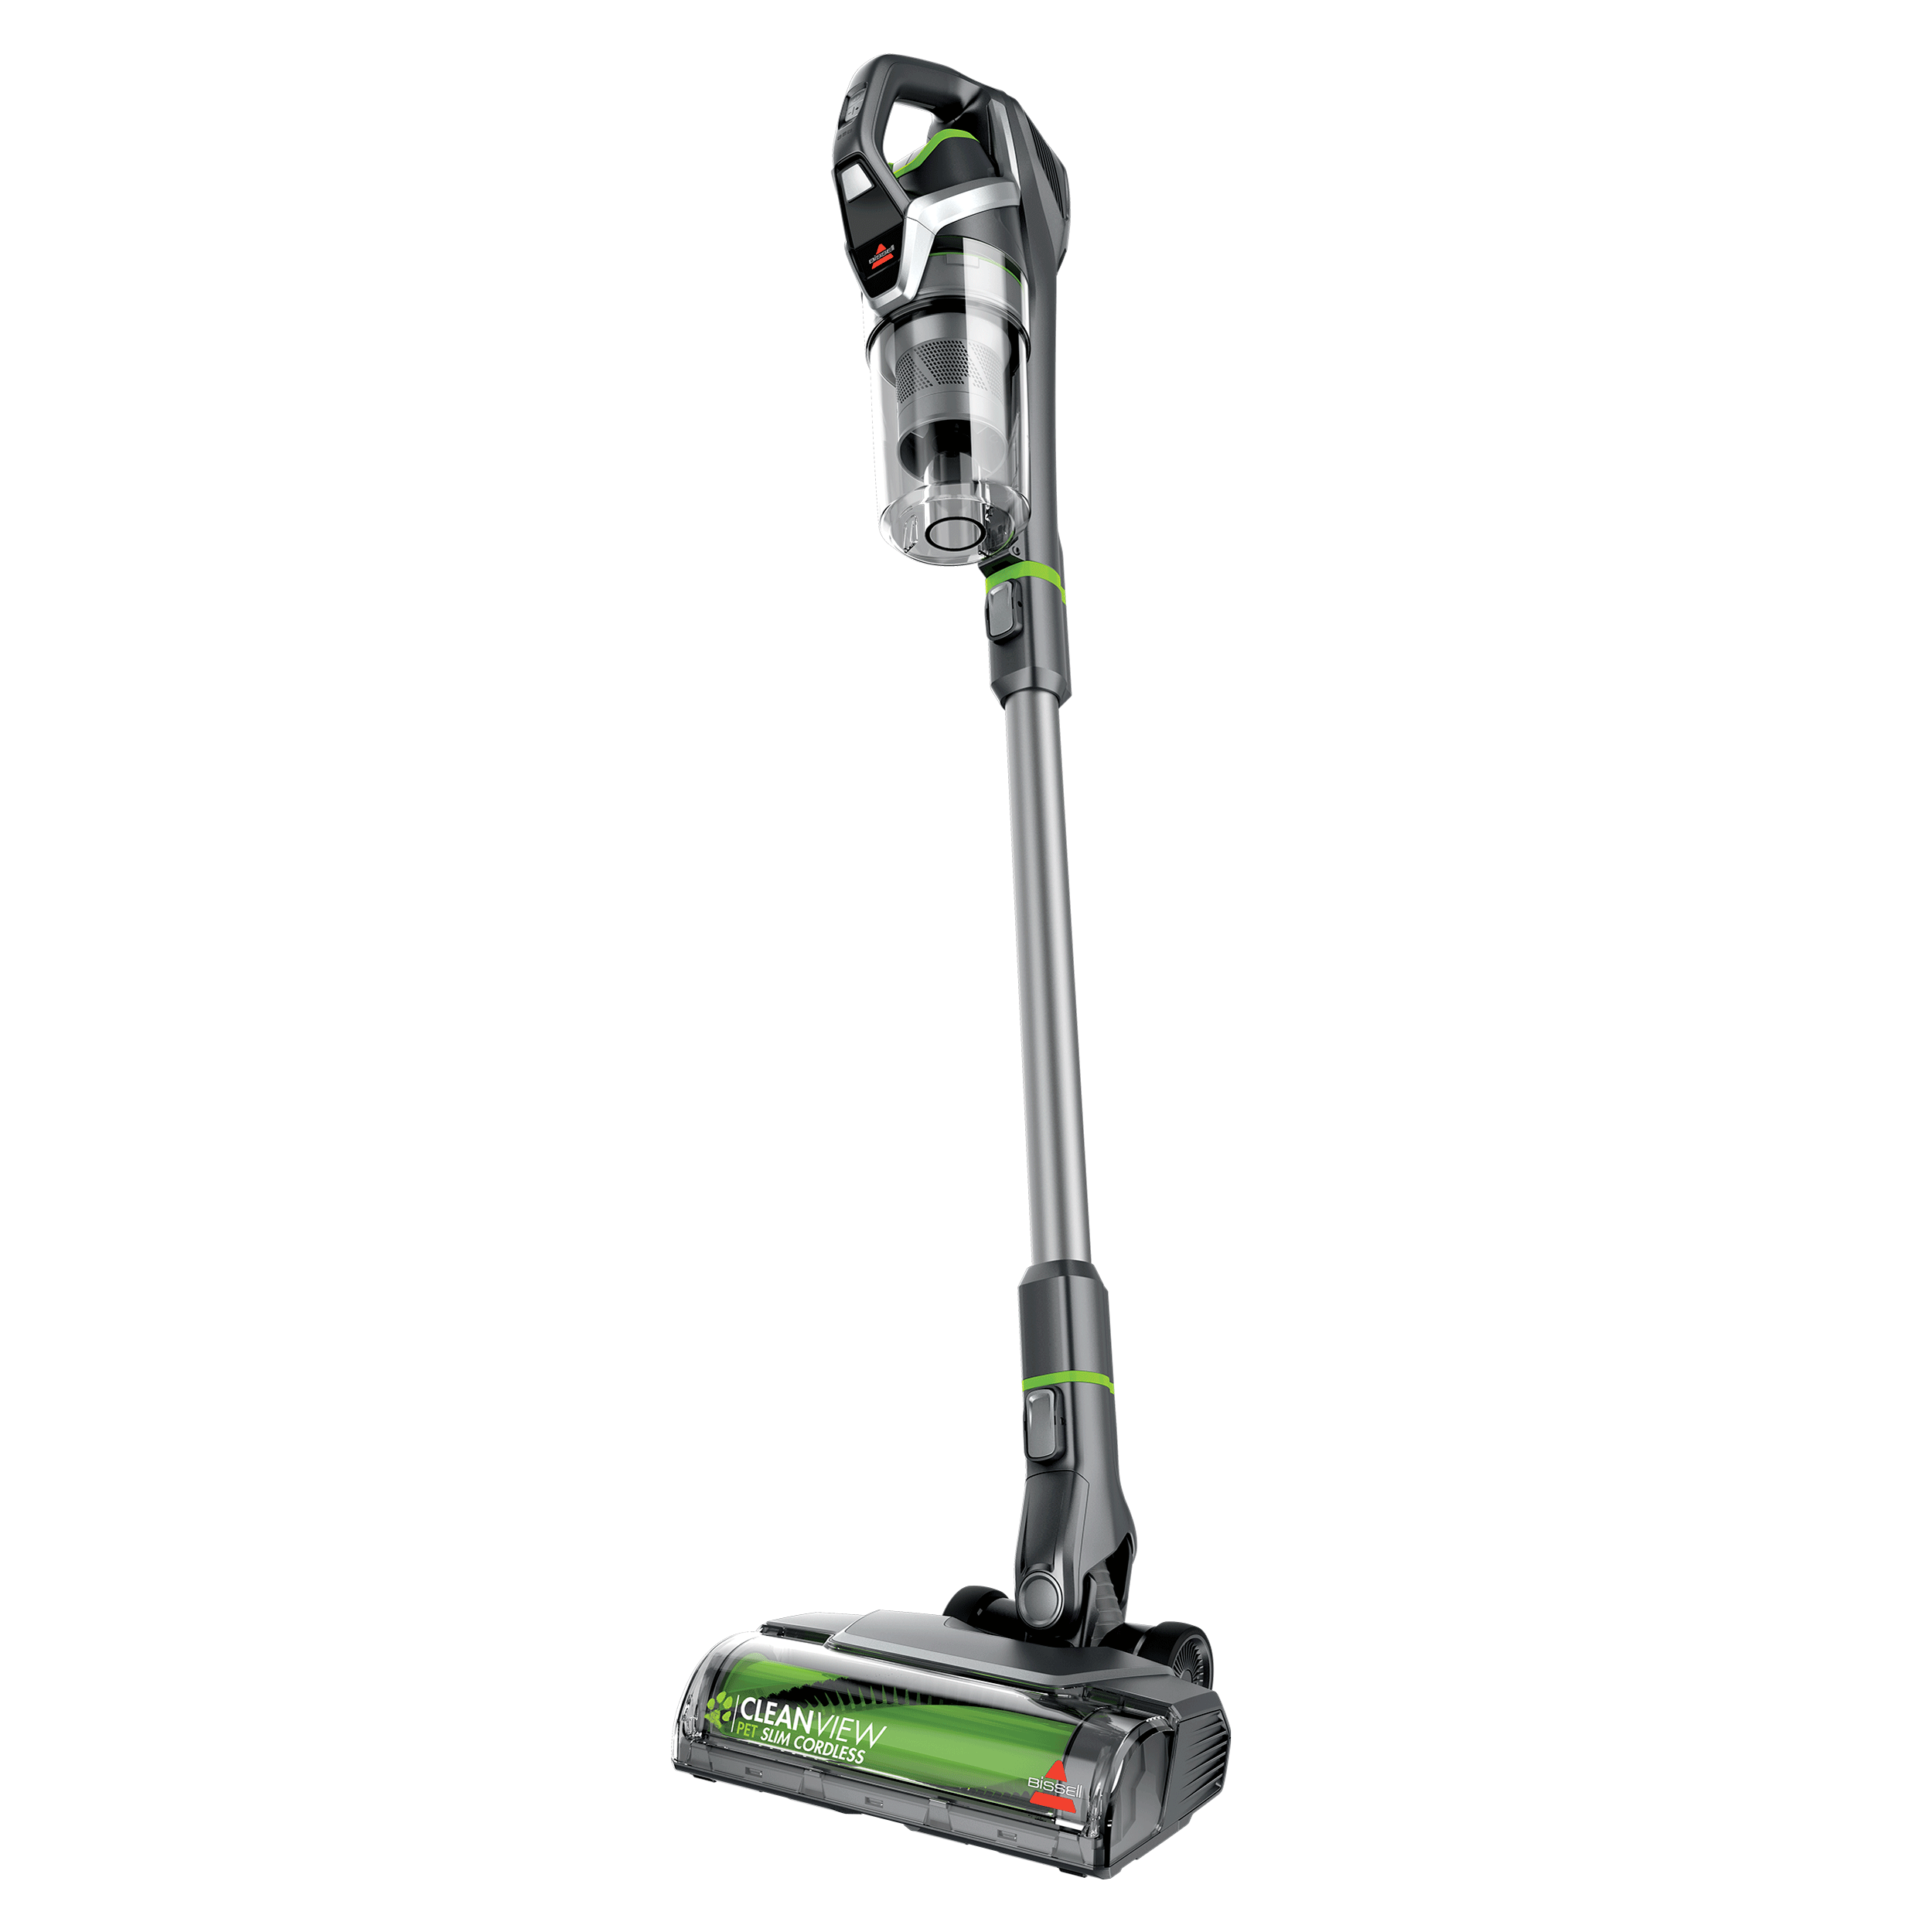 https://www.bissell.com/on/demandware.static/-/Sites-master-catalog-bissell/default/dweed97842/hi-res/Product-Images/29037/CleanView_Pet_Slim_Cordless_29037_Secondary1.png